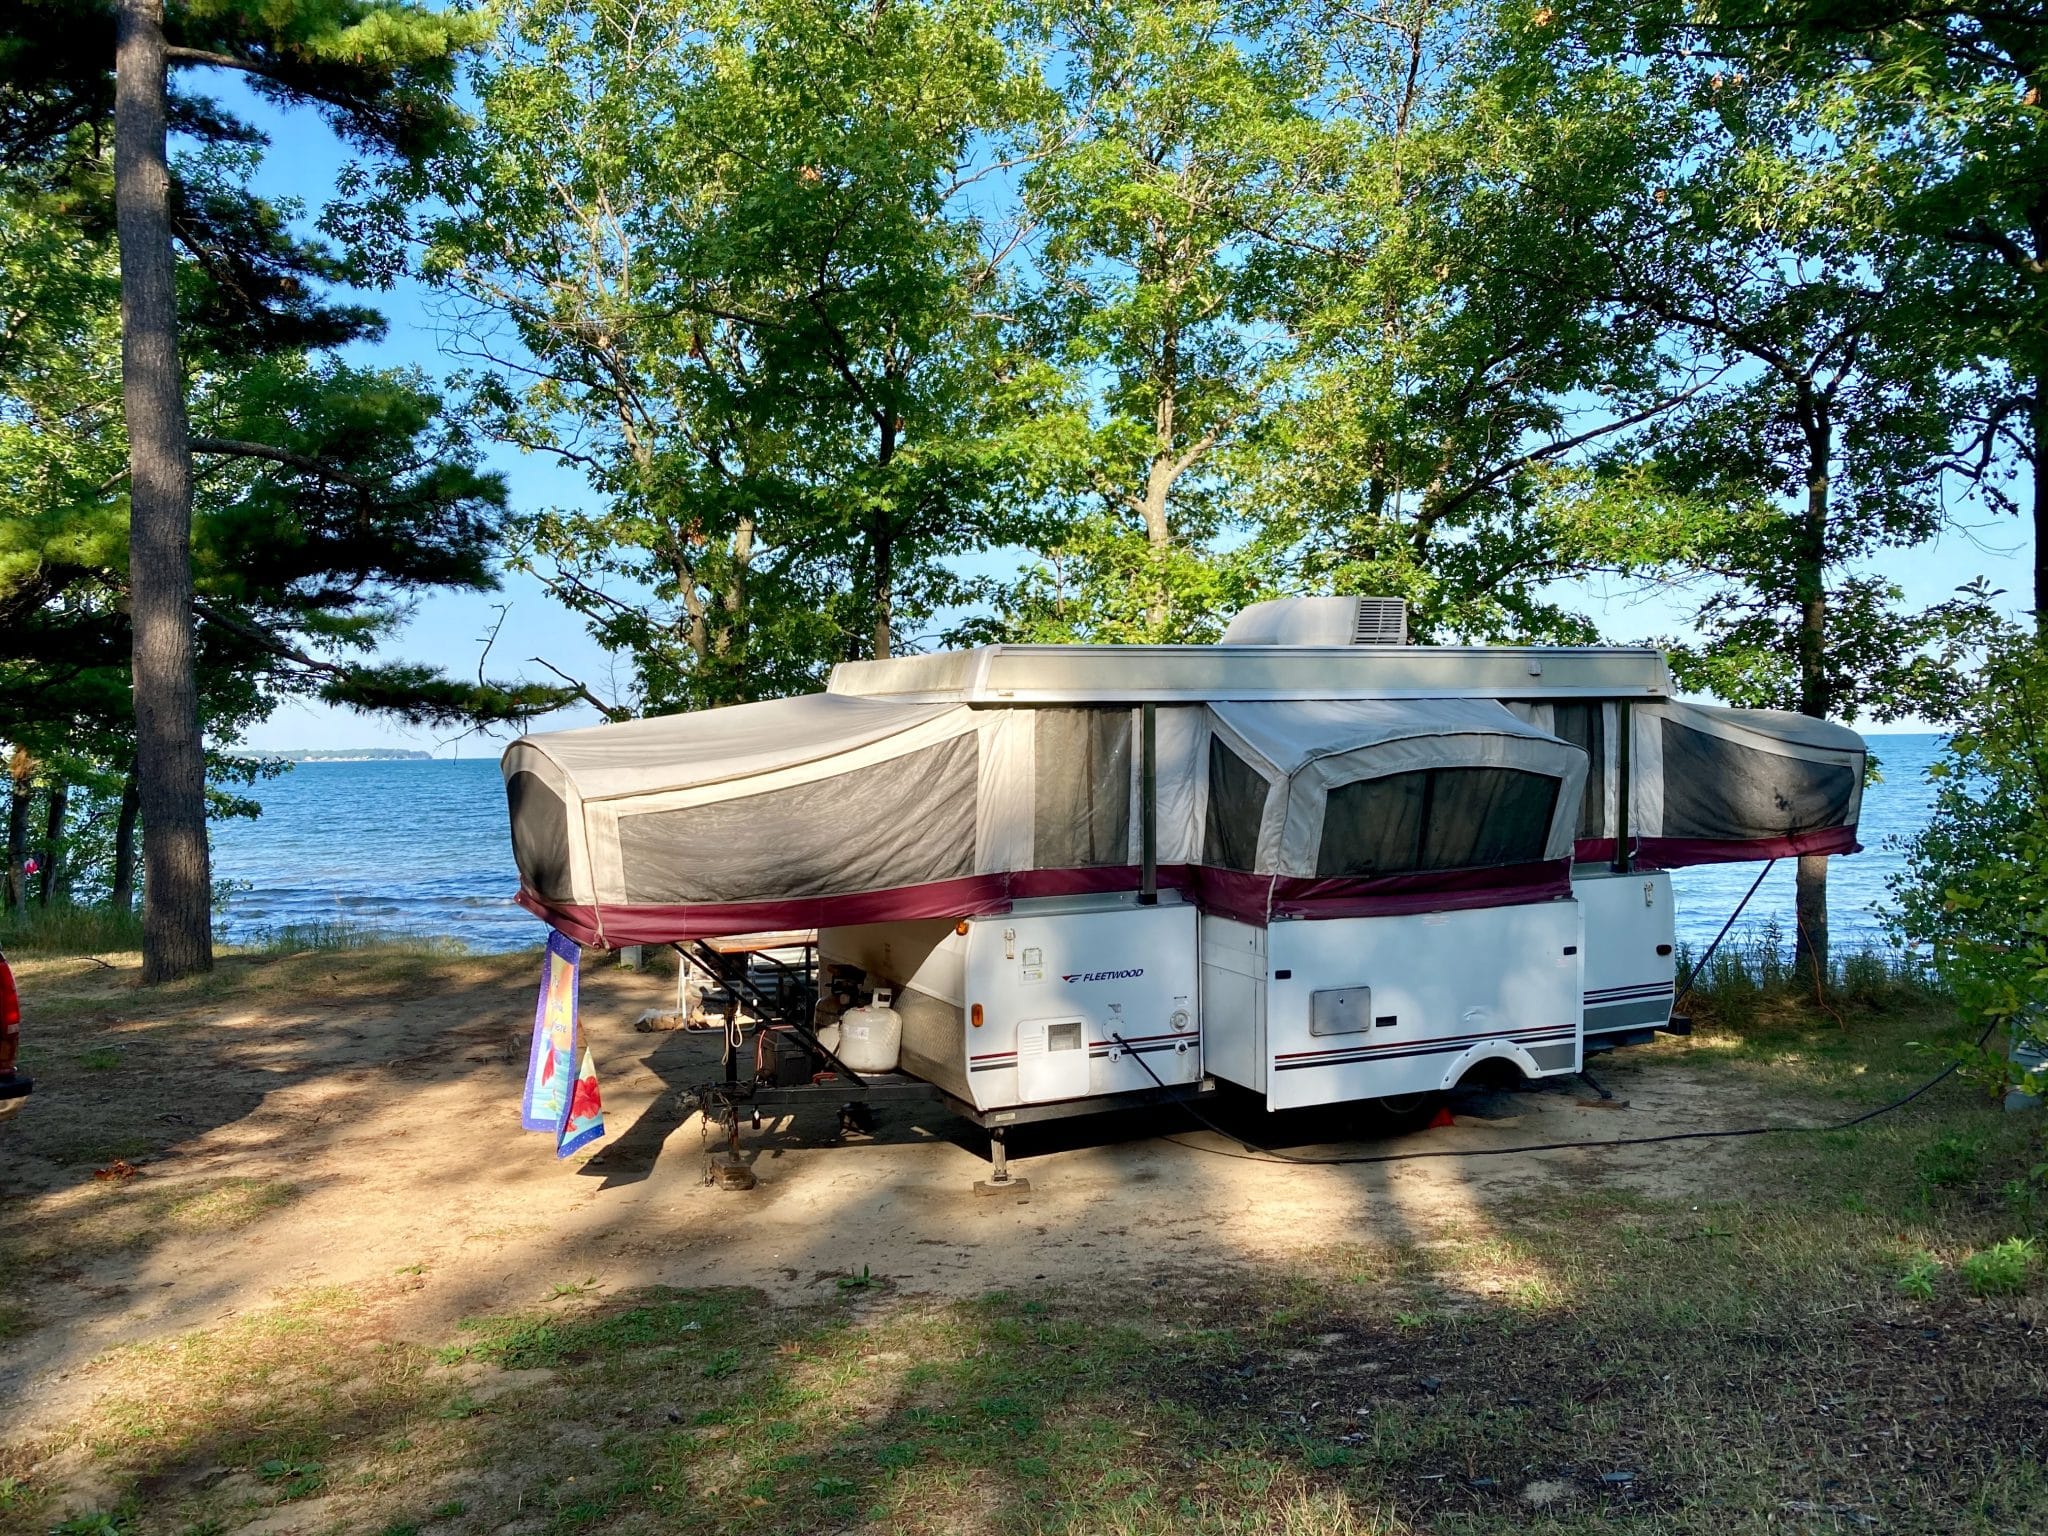 RV Rental in Michigan State Parks – 9 Motivations To Consider In 2022